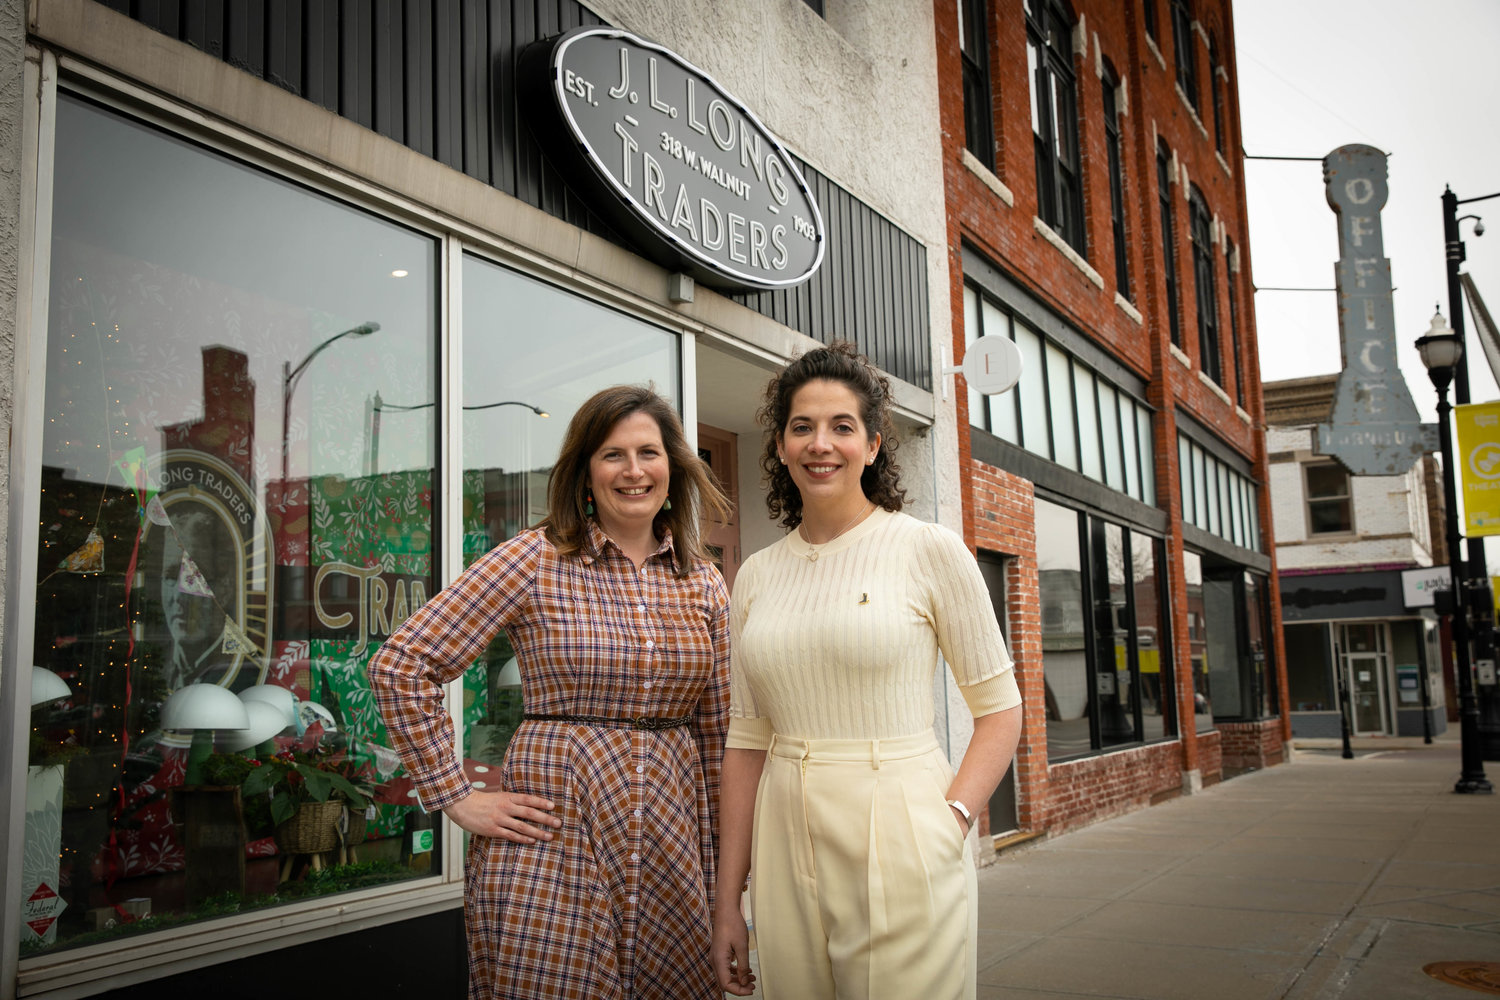 Sisters Kaleen Long, left, and Kelle Rathe are the owners of J.L. Long Traders LLC.